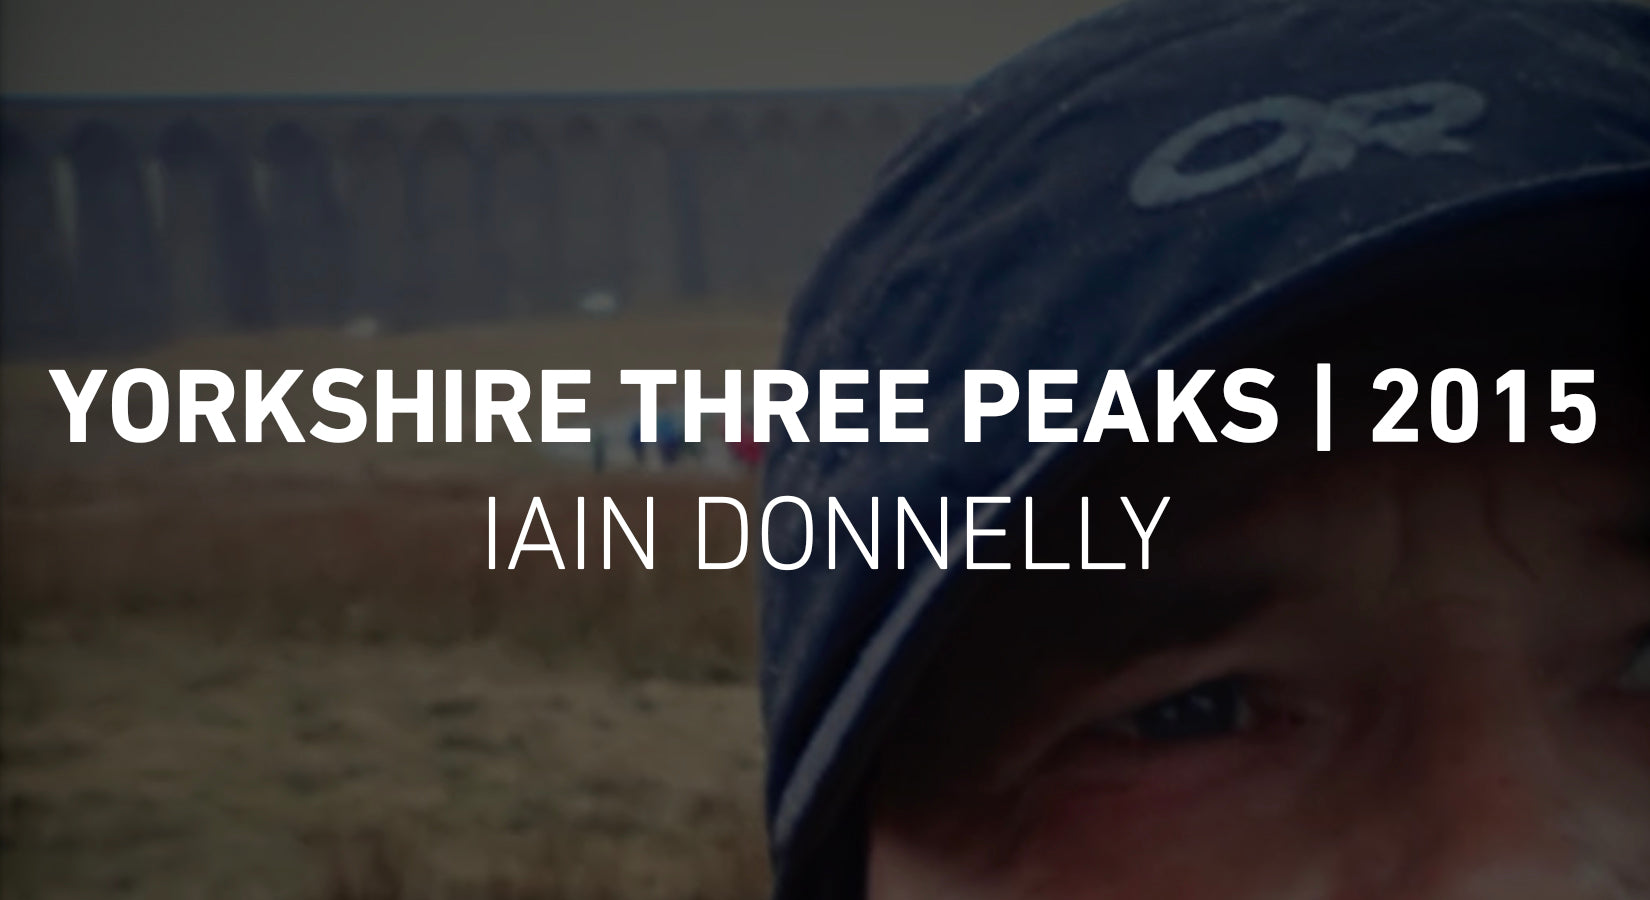 Race Report - Yorkshire Three Peaks Fell Race - Iain Donnelly - 2015